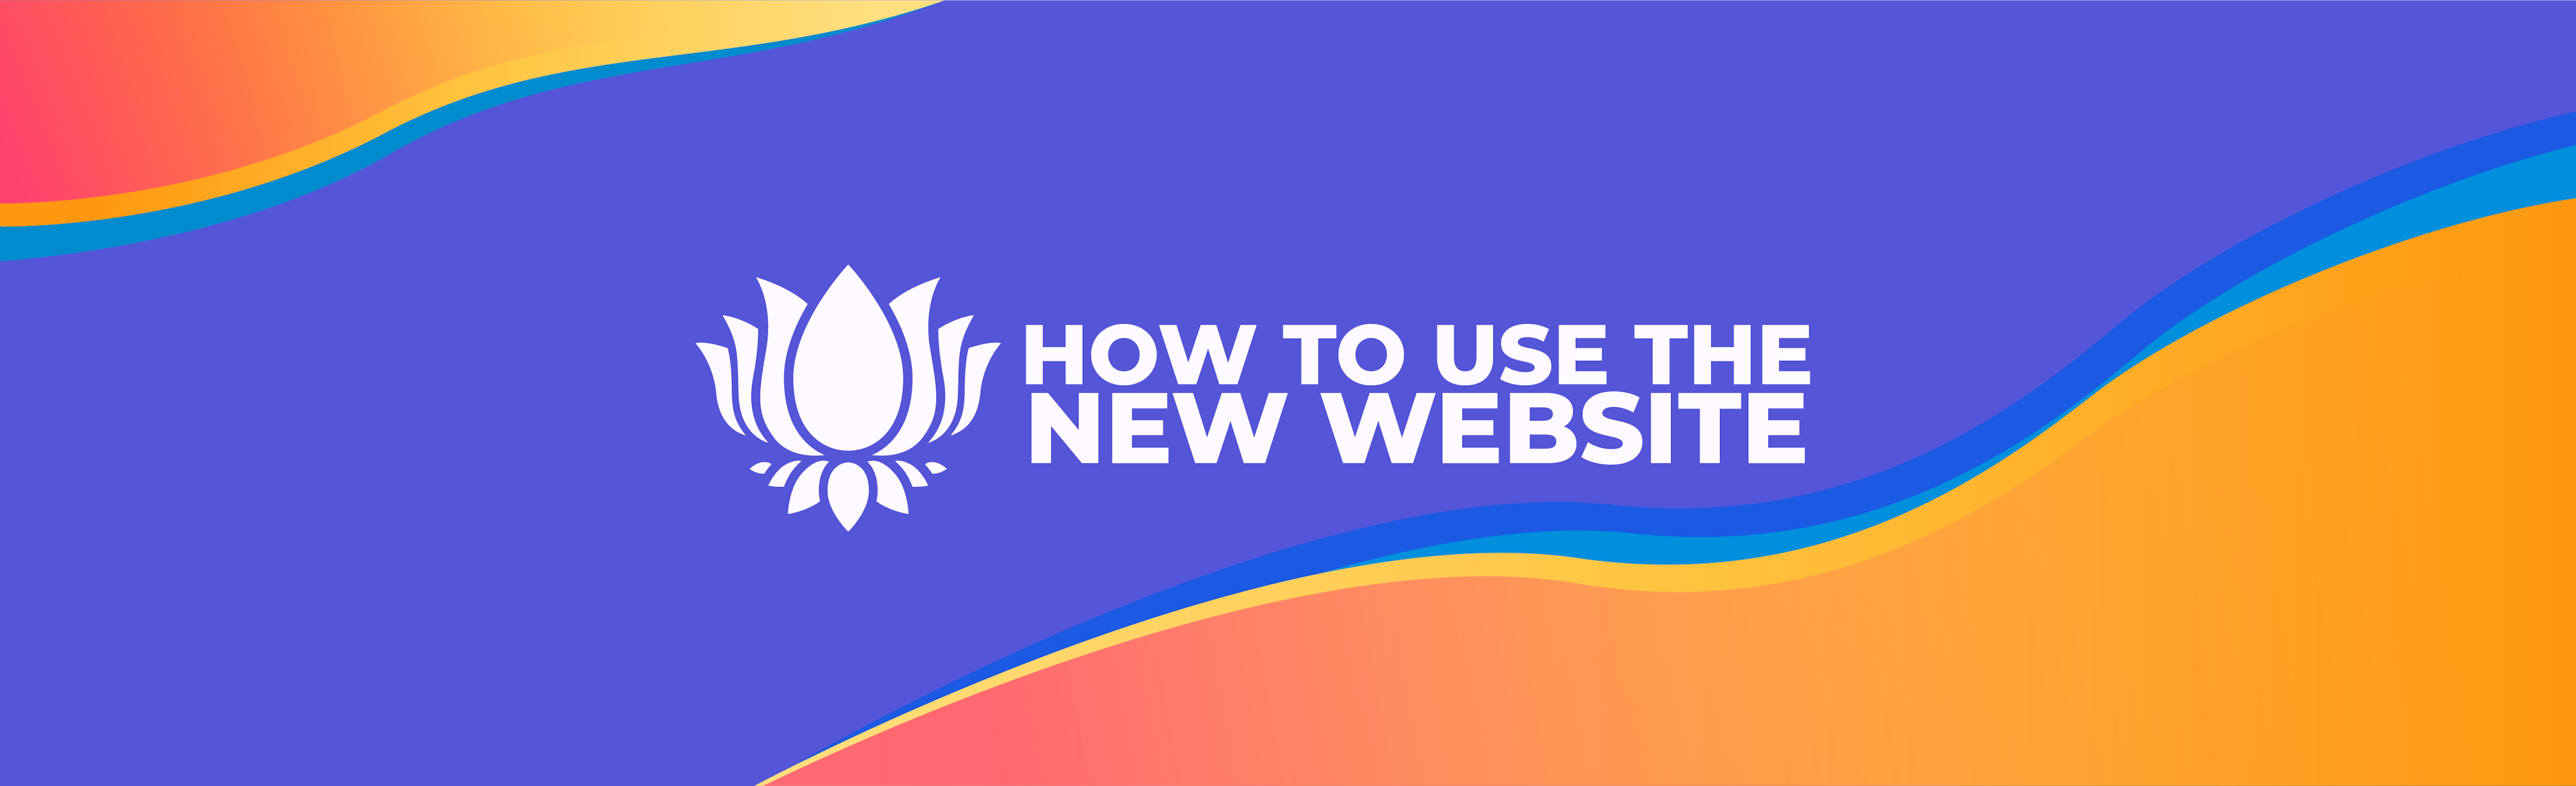 How To Use The New Website